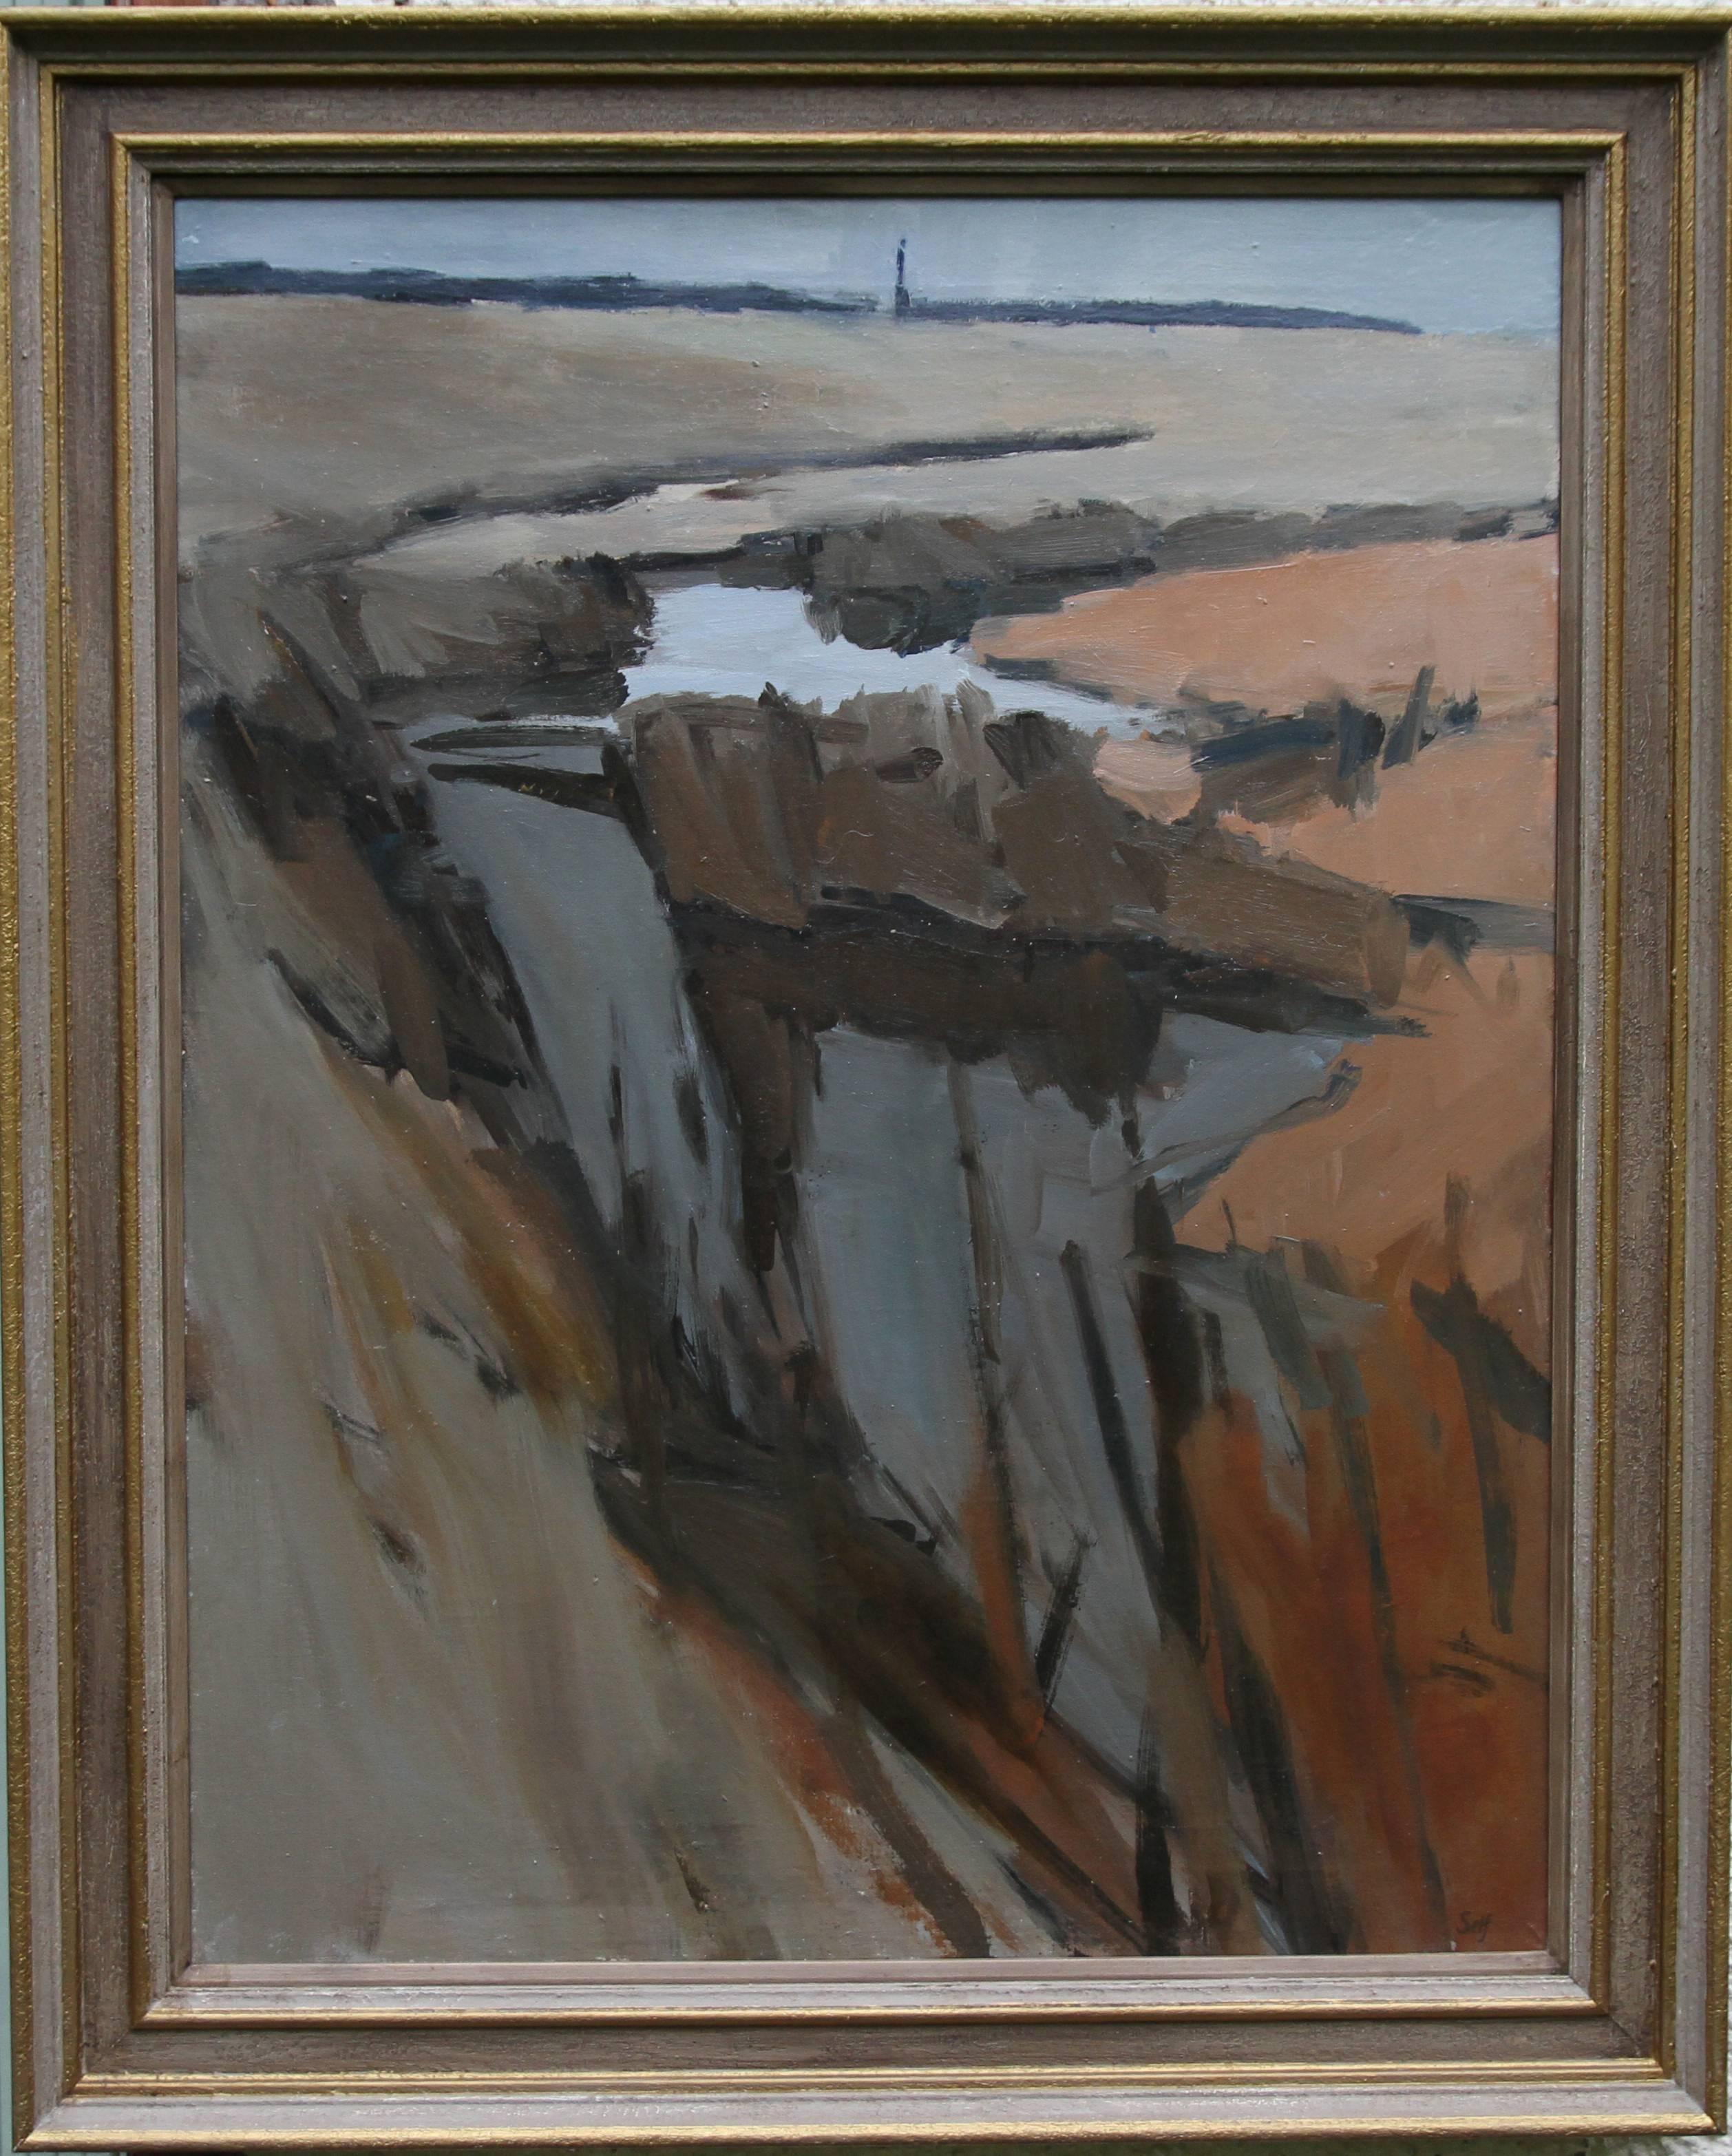 Lawrence Self Landscape Painting - Essex Landscape - British 20th century Abstract art landscape oil painting 